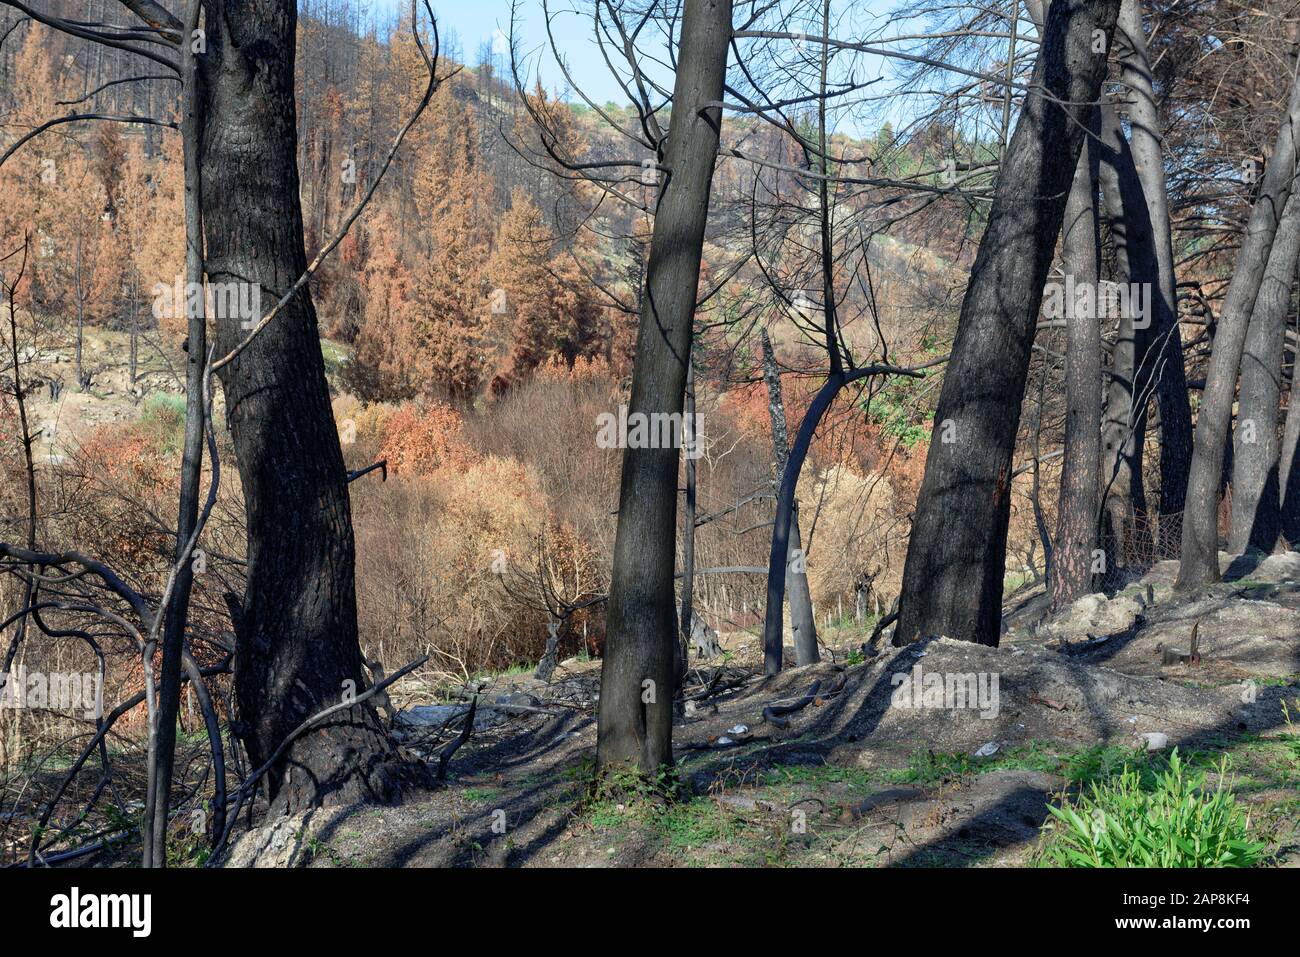 Burnt trees. Consequences of forest fires. Natural disasters. Stock Photo